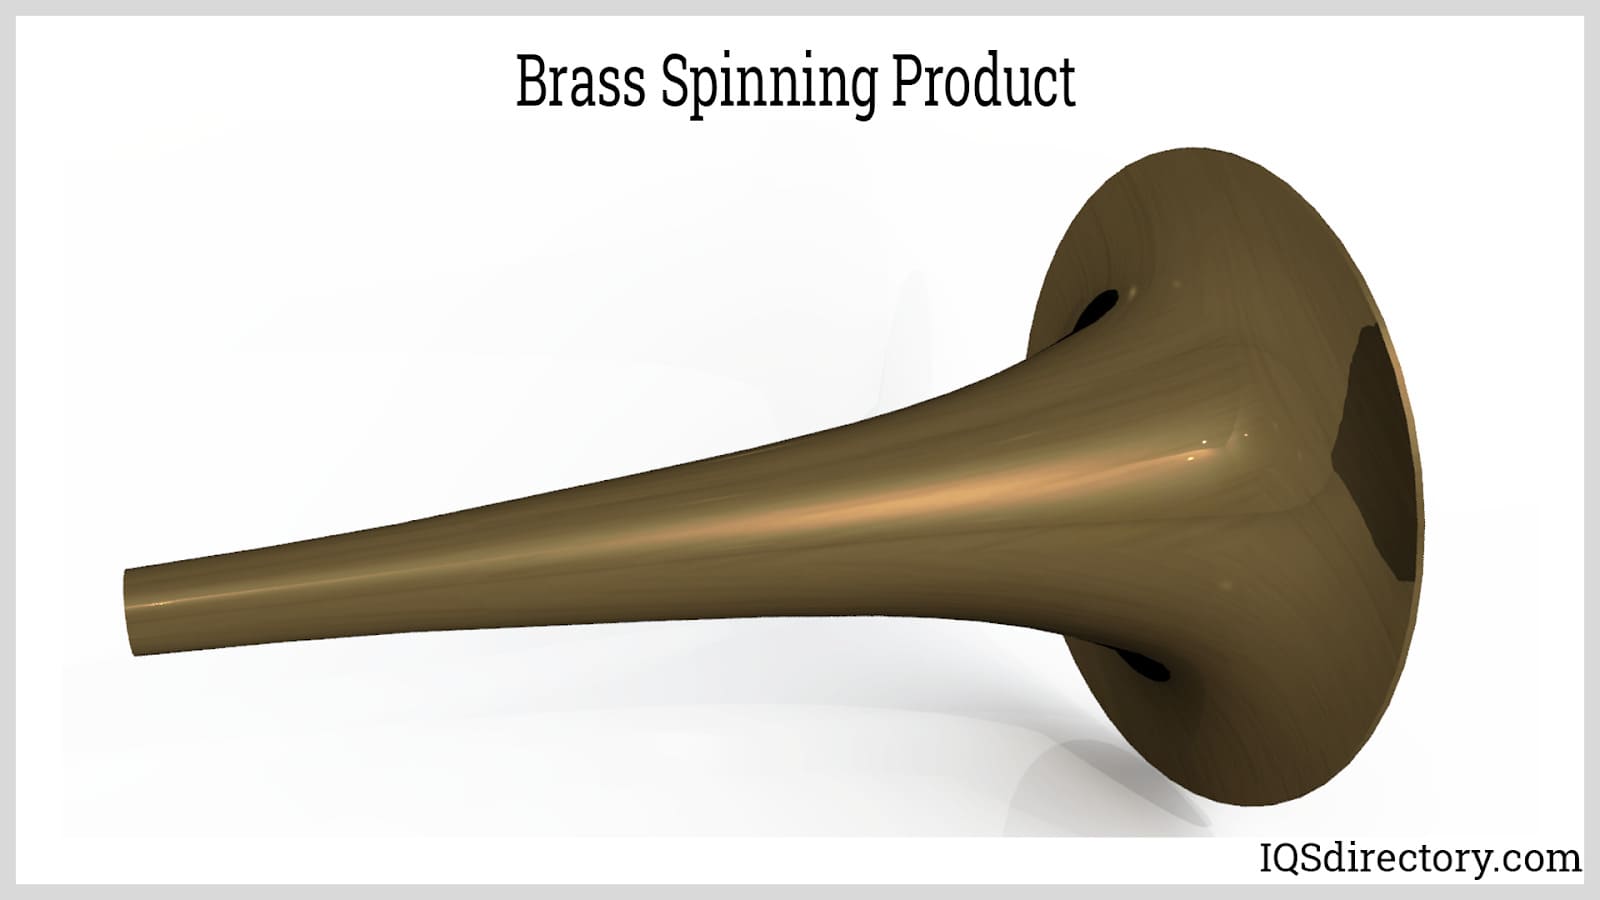 Brass Spinning Product